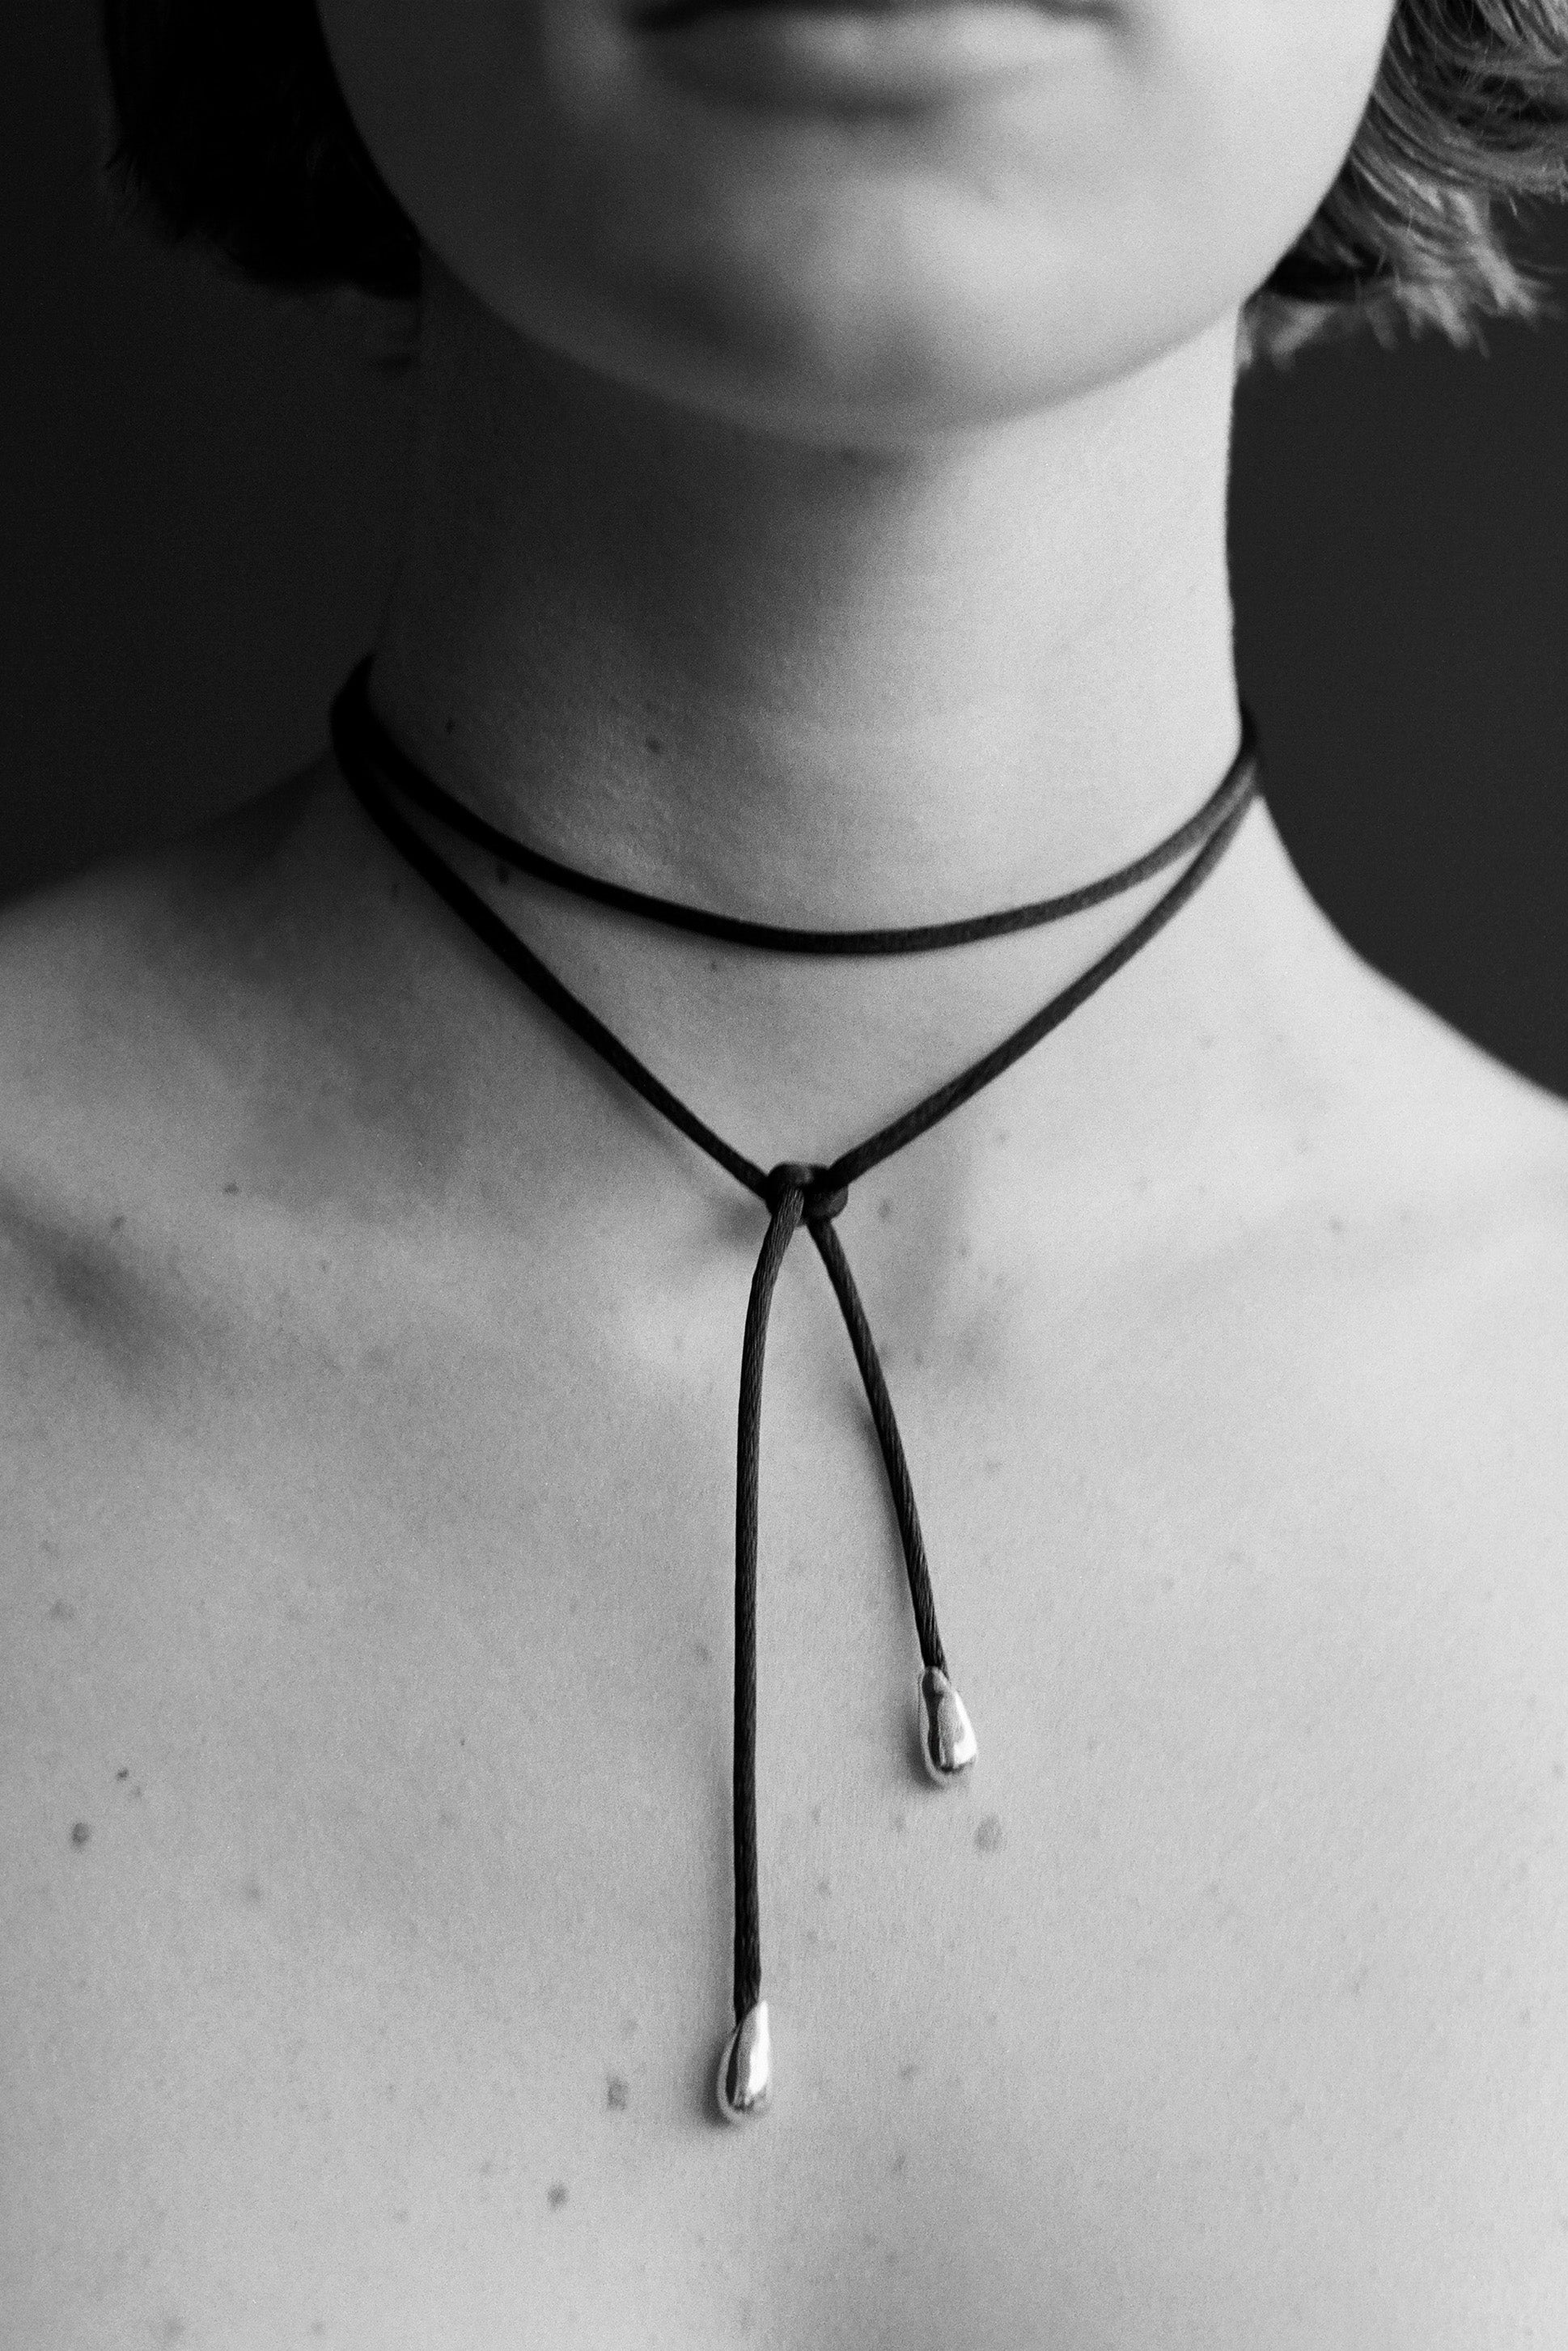 Choker Necklaces - Mens Silver Choker Chains